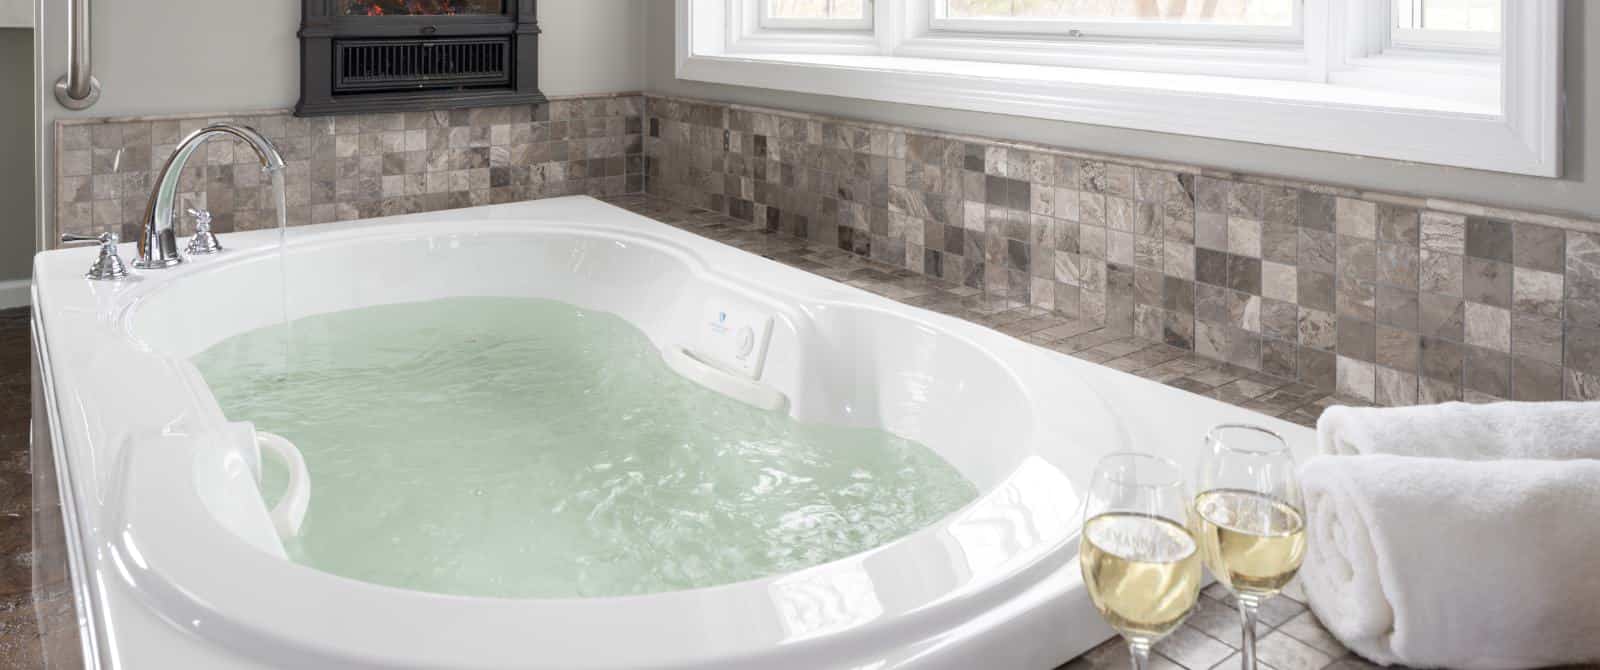 Large jetted tub filled with water and surrounded by tile in shades of gray